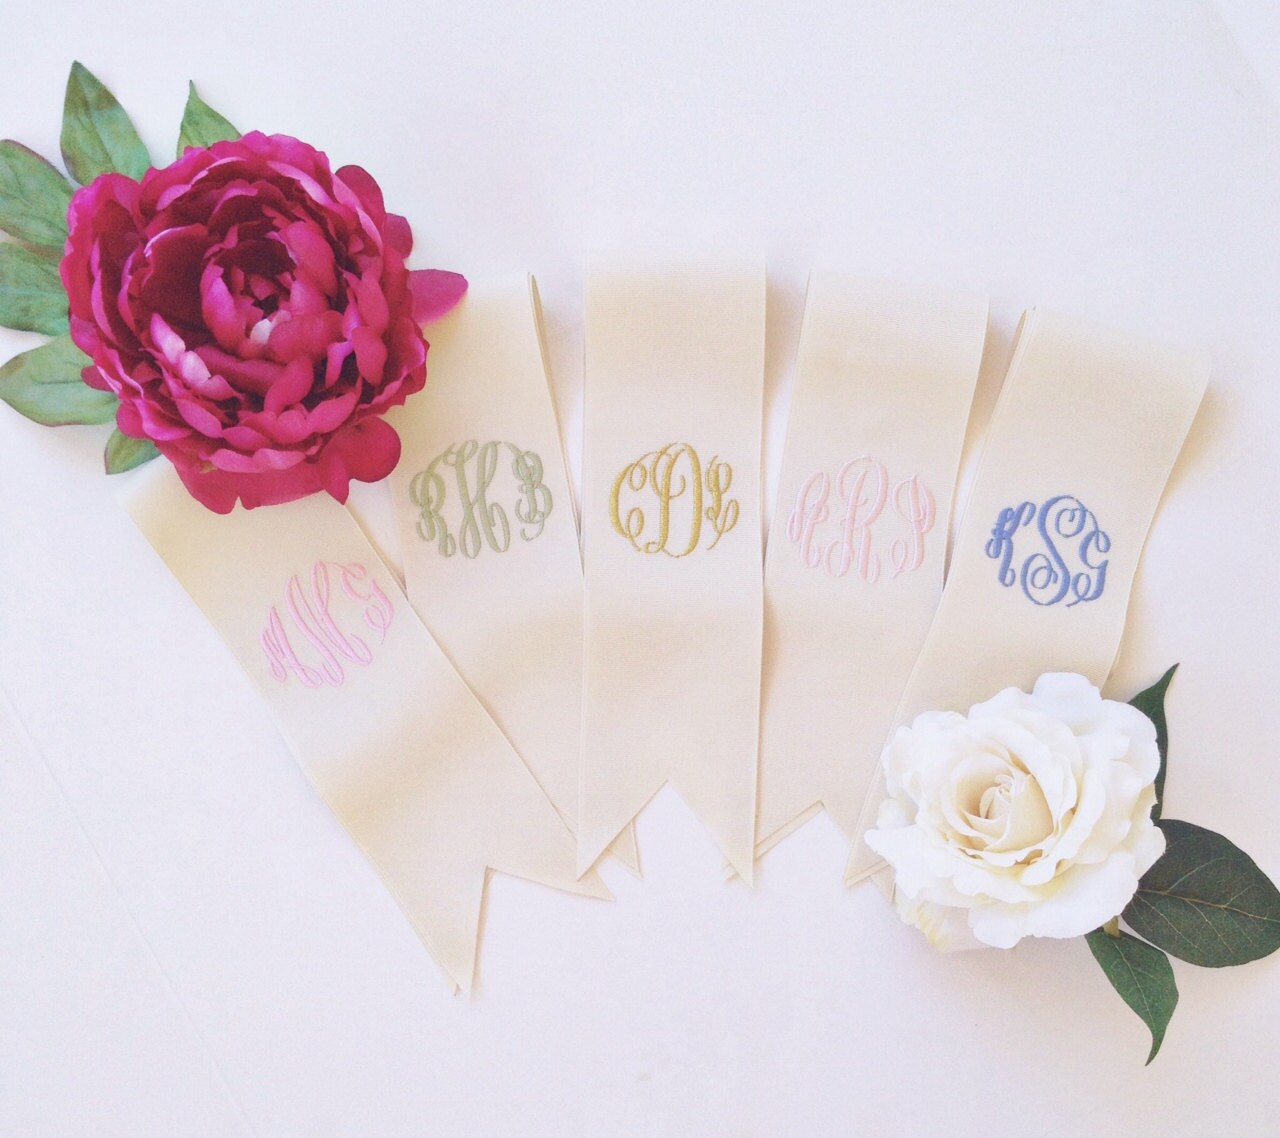 Personalized Ribbon for Bouquet - Charlotte's Web Monogramming & Gifts